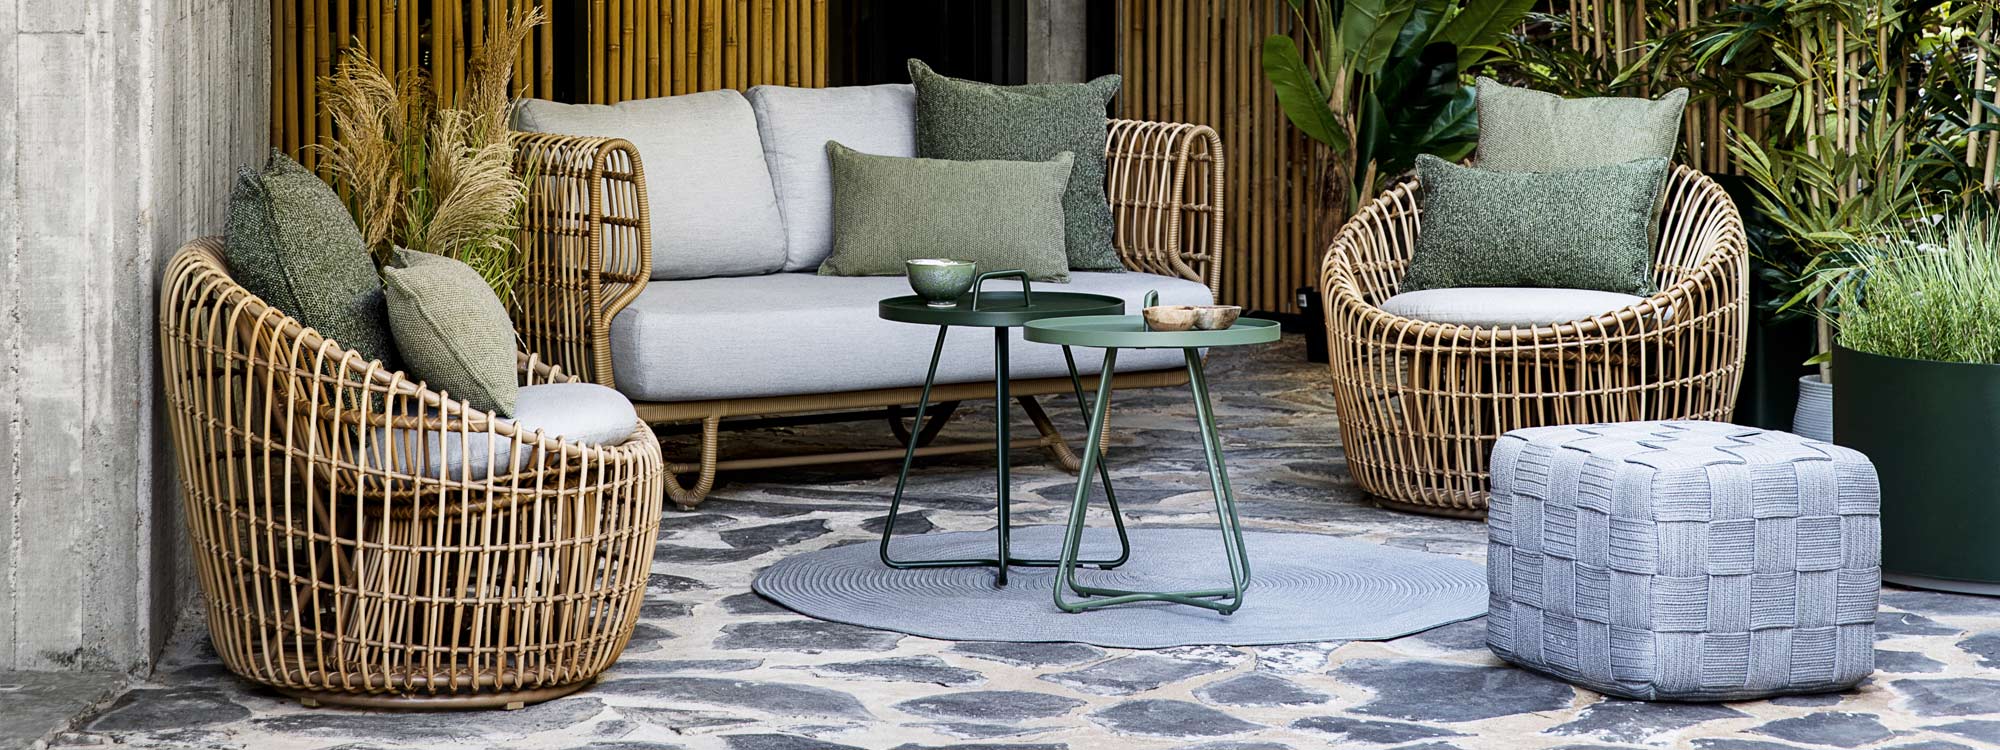 Nest modern wicker garden sofa is all-weather cane lounge furniture in high quality outdoor furniture materials by Cane-line luxury outdoor furniture.